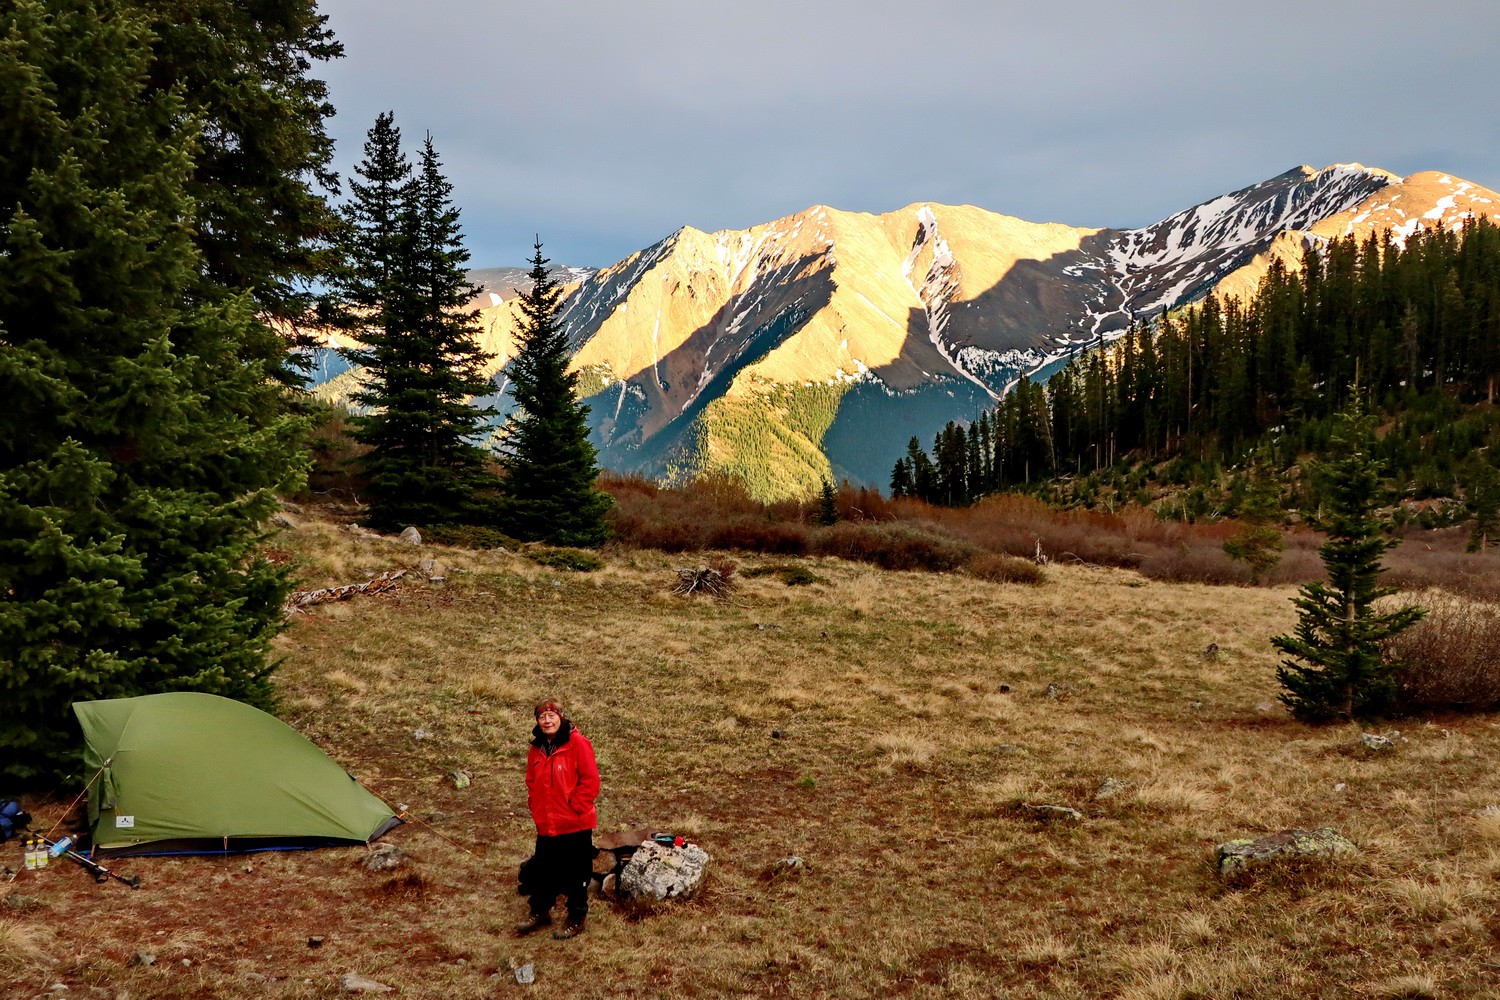 Our camp on the Black Cloud Trail to Mount Elbert